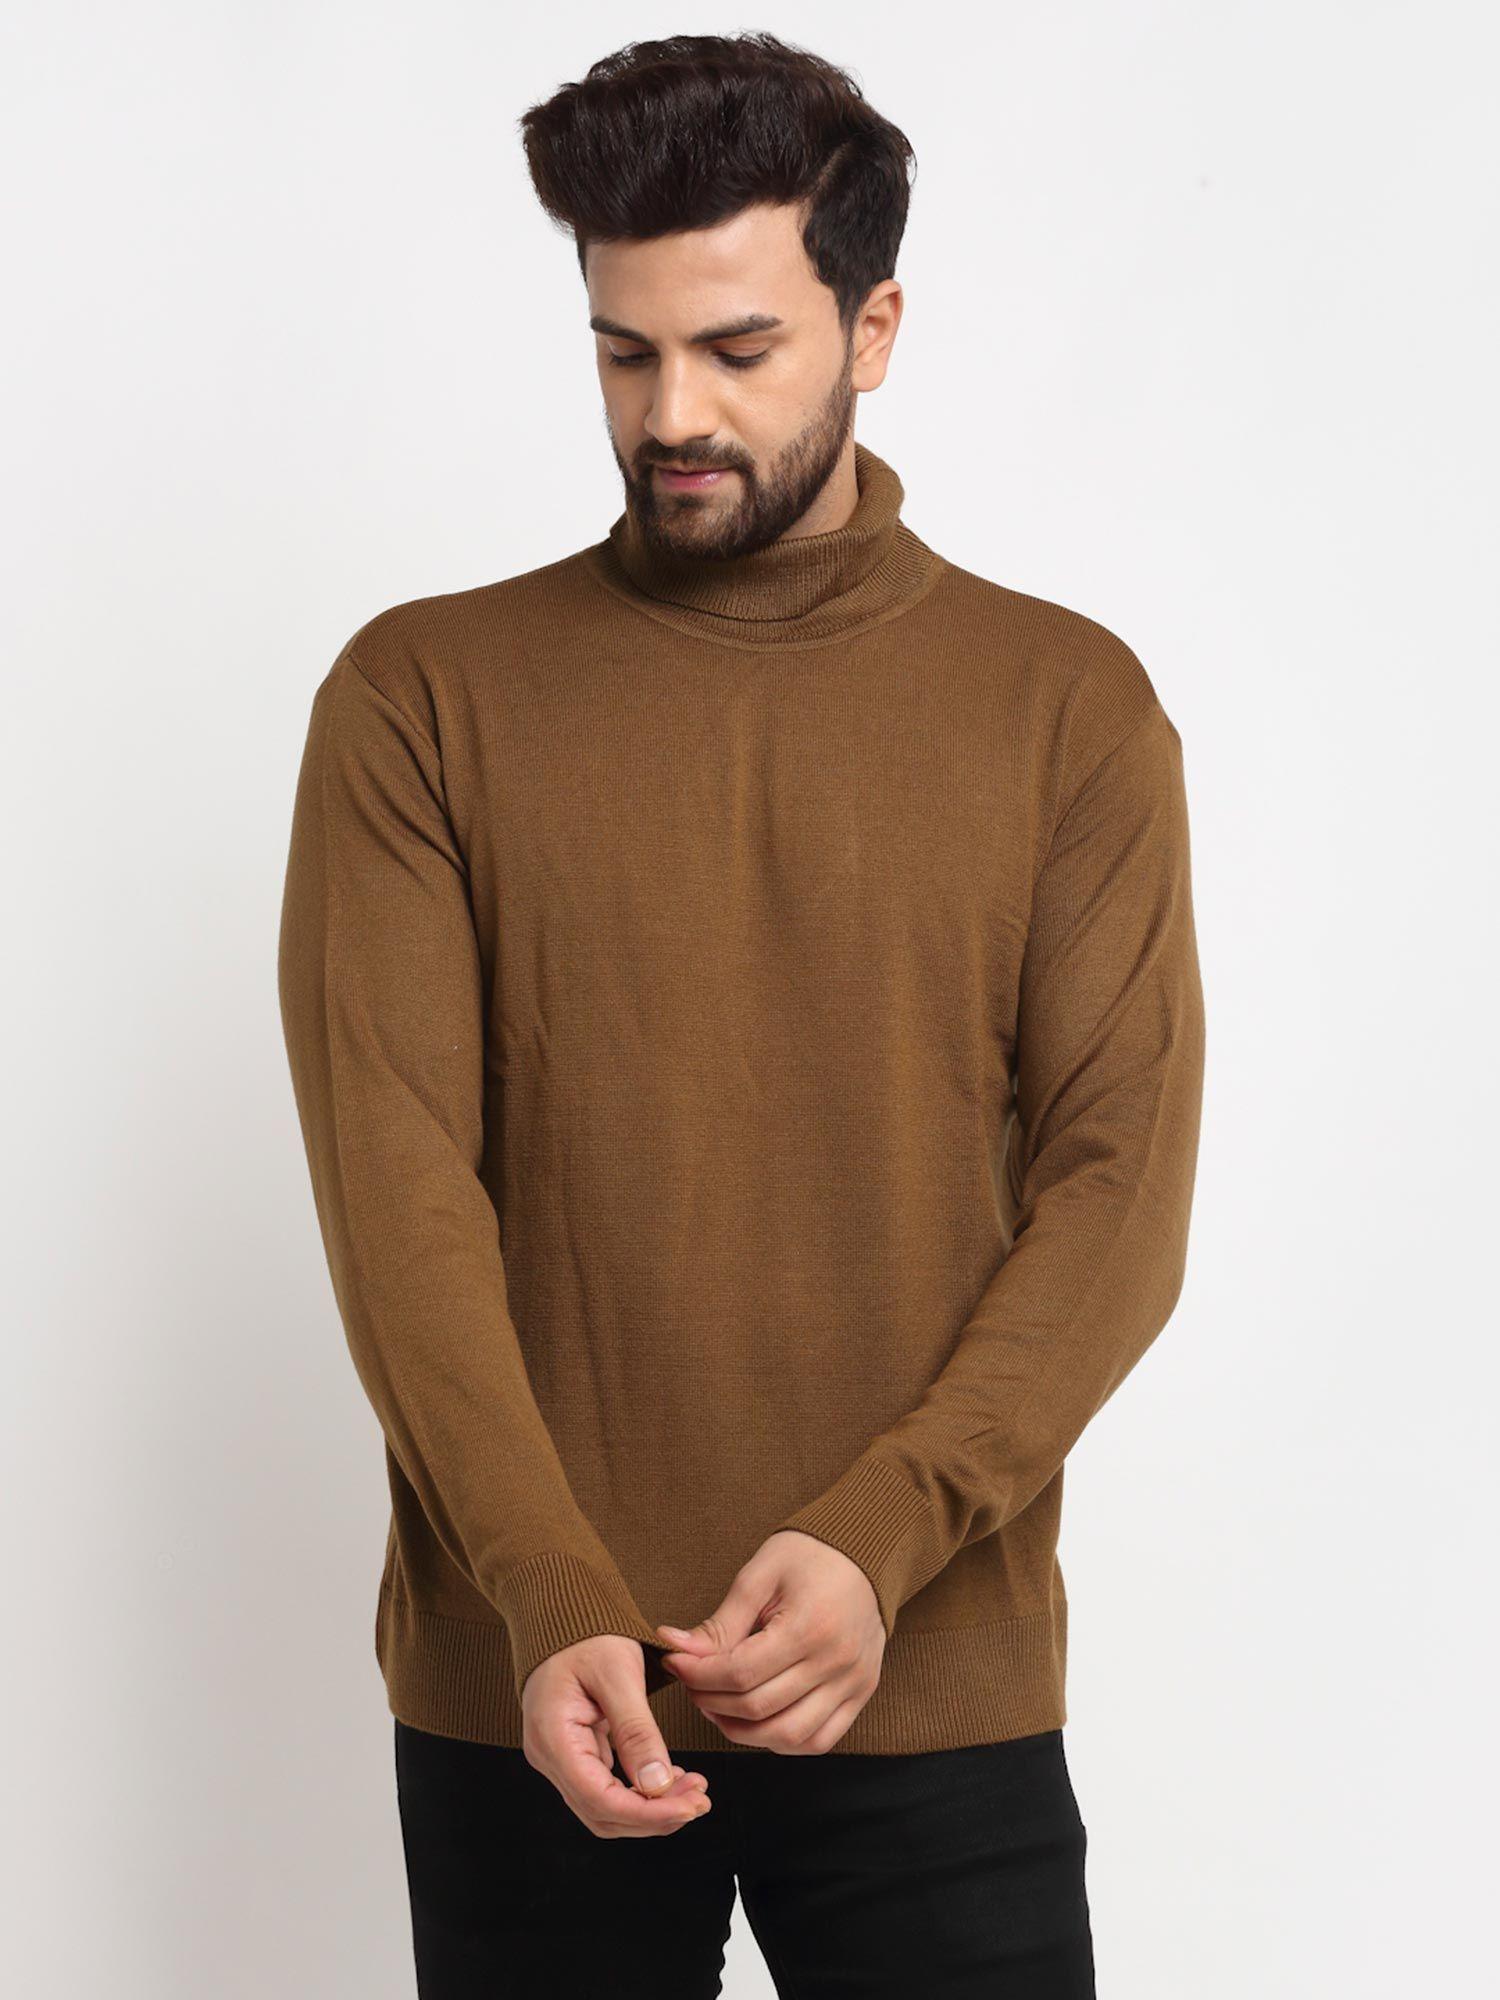 men's brown full sleeve solid high neck sweater